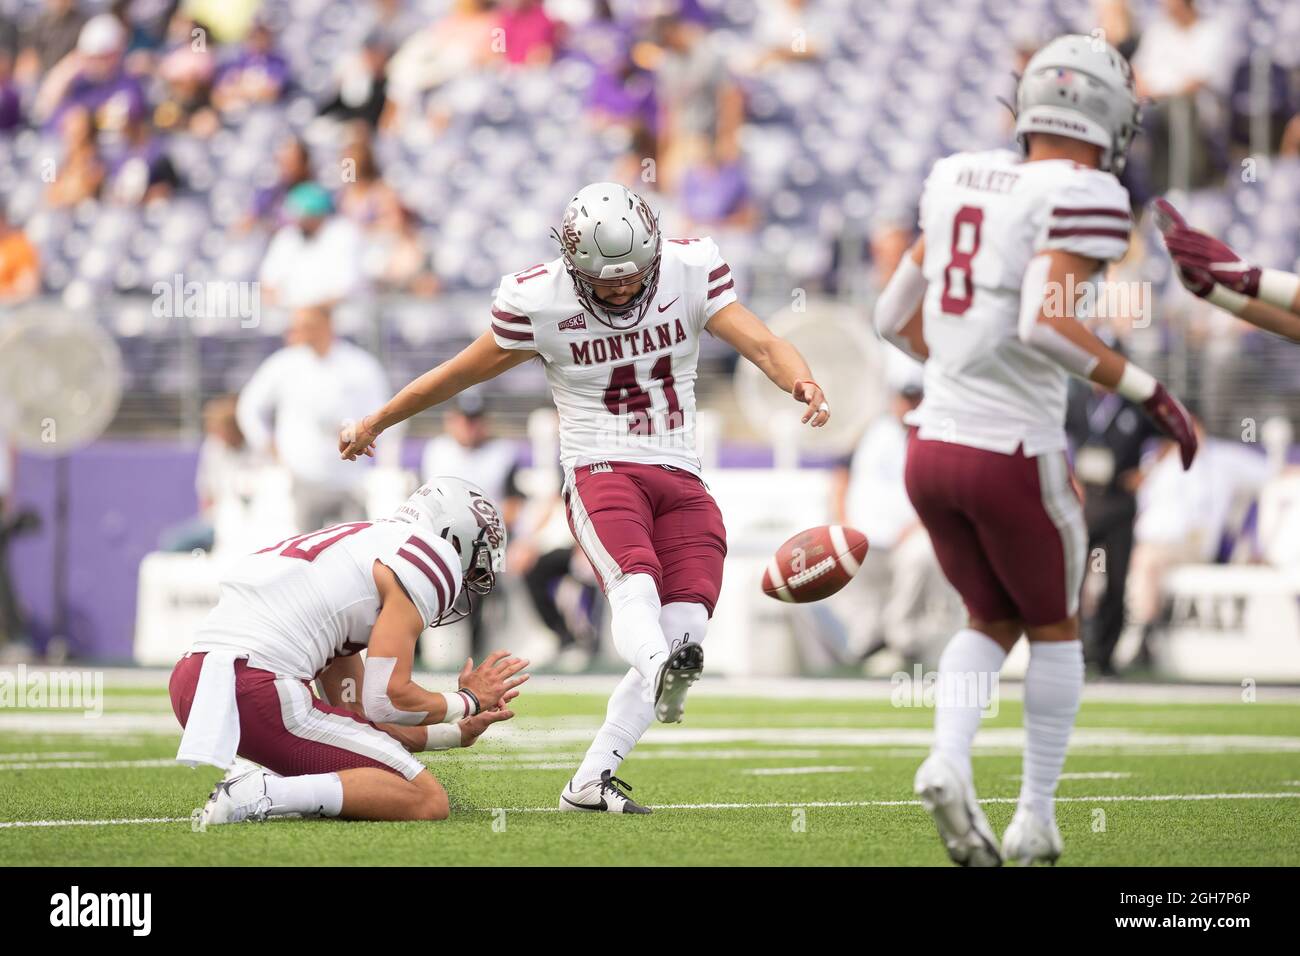 Montana Grizzlies place kicker Kevin Macias (41) practices during warmups of an NCAA college football game between the Washington Huskies and the Mont Stock Photo